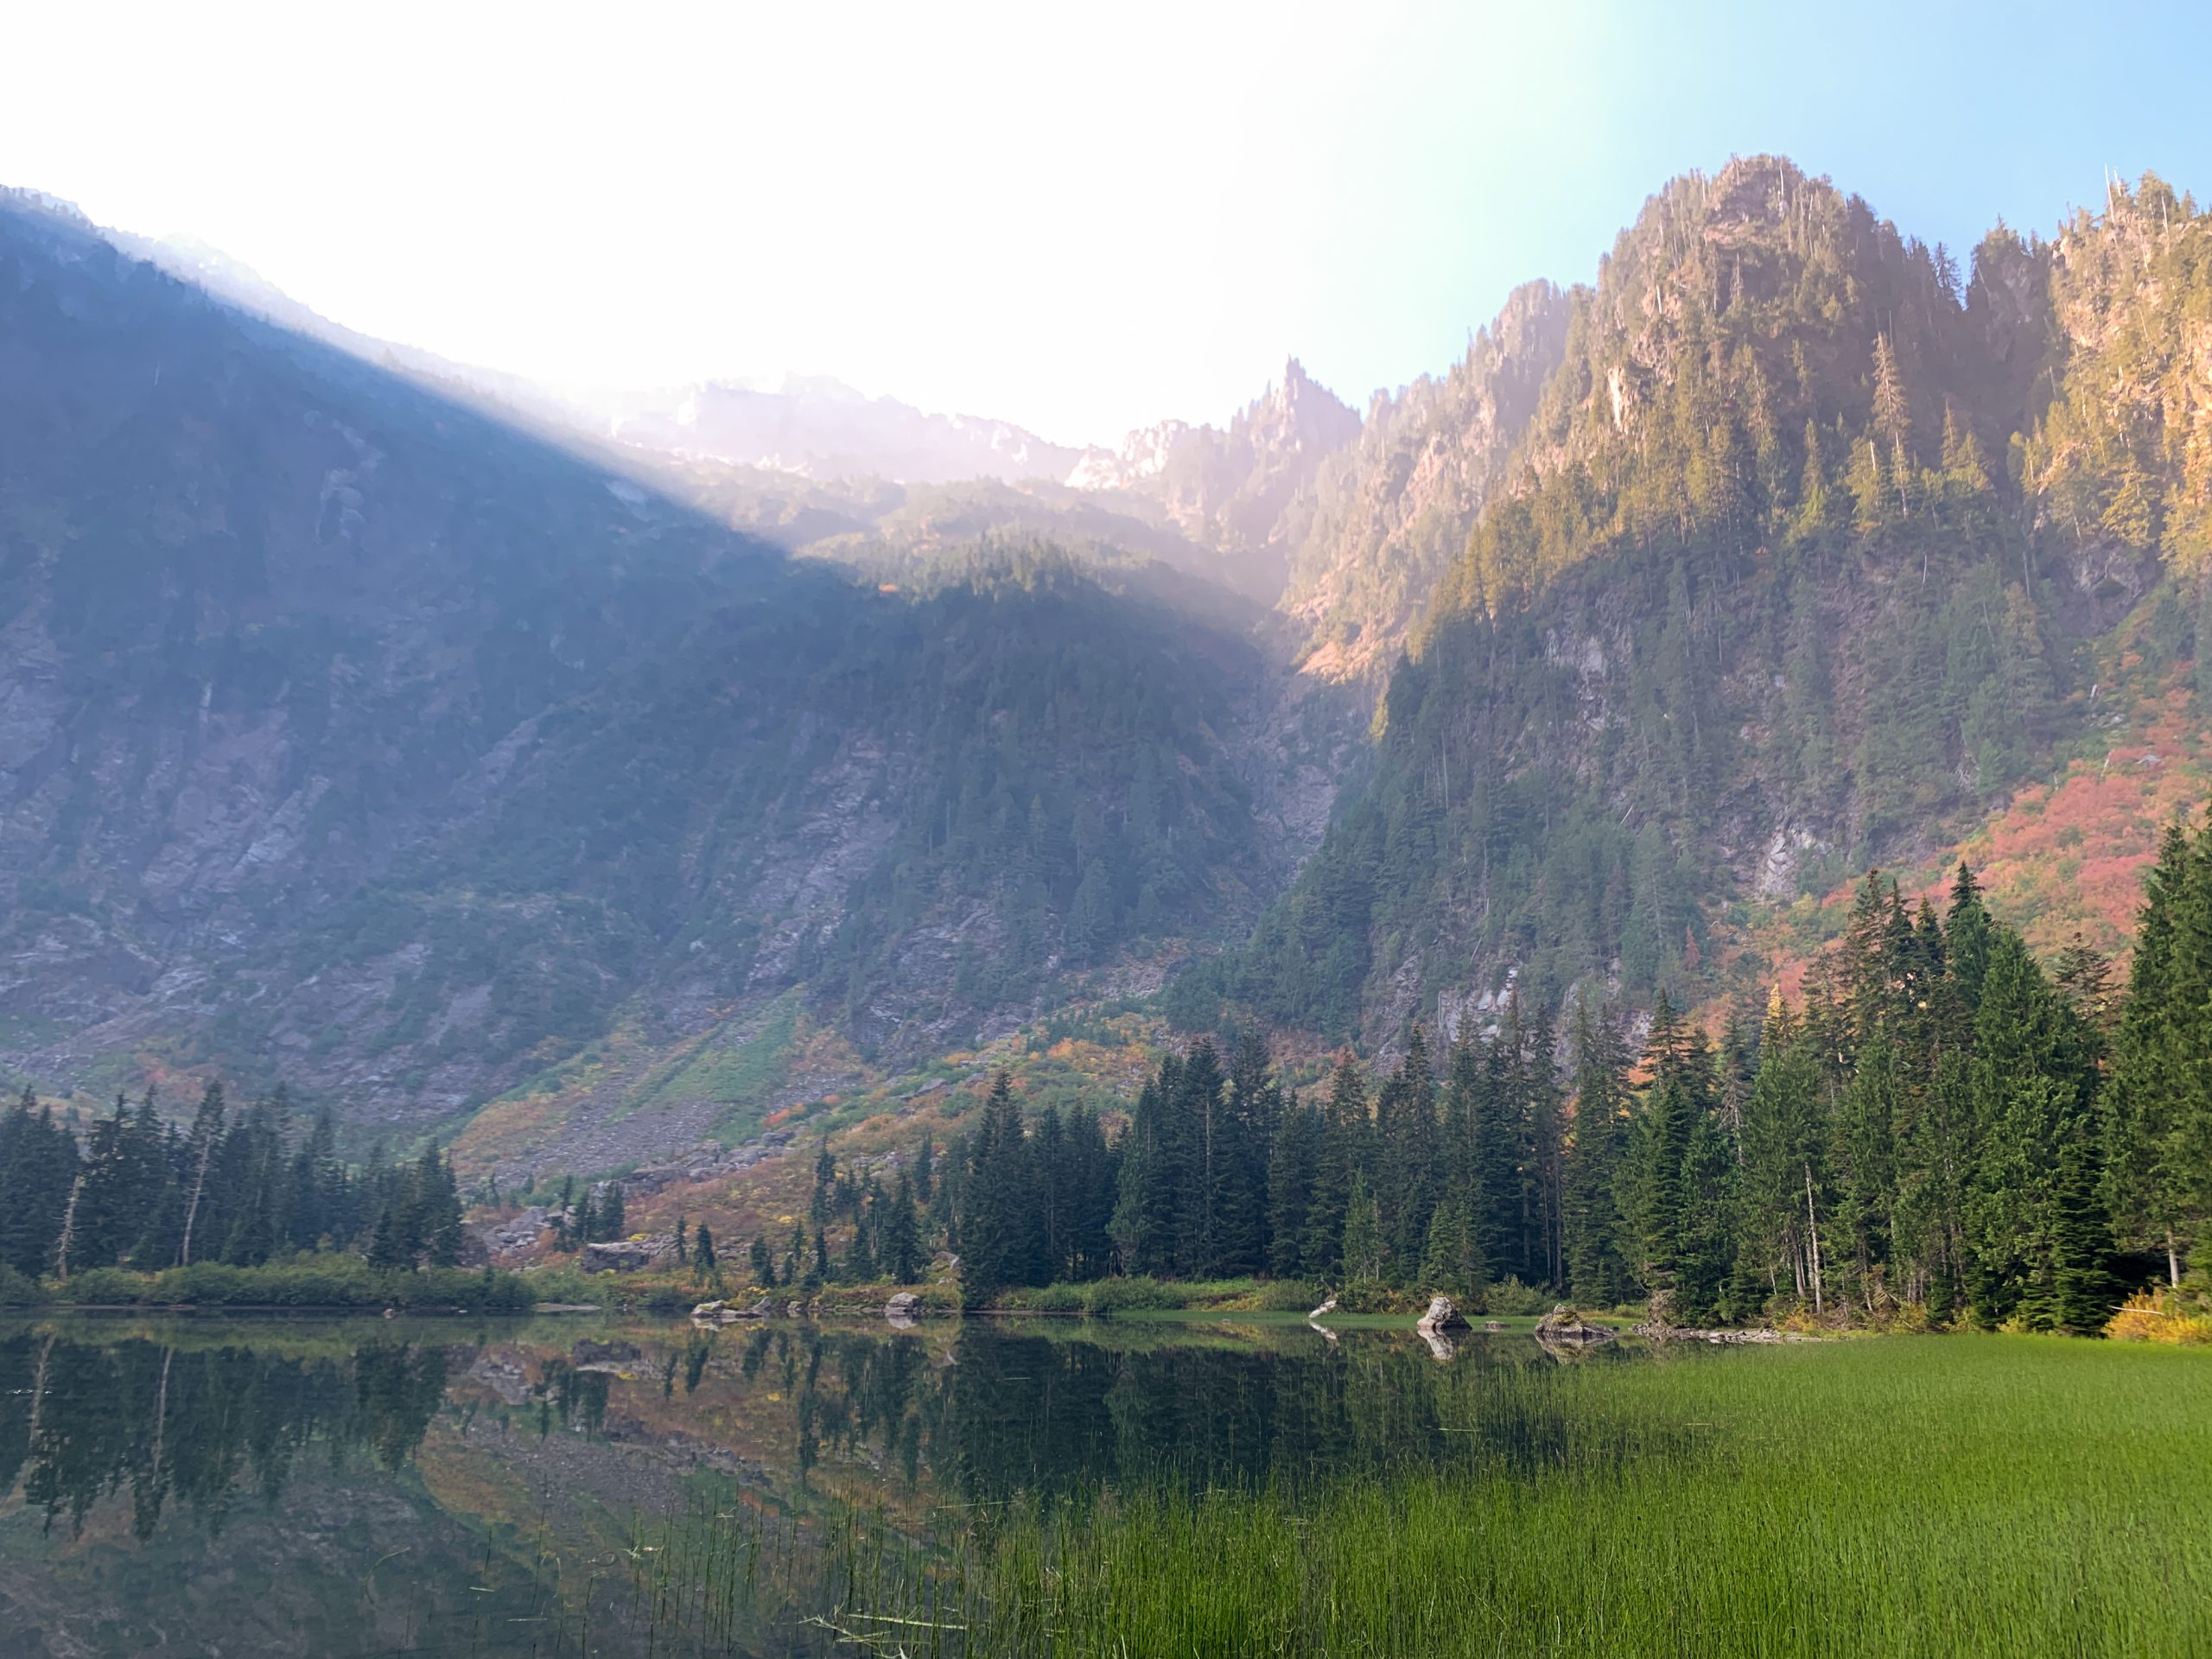 Beautiful view of Heather Lake in the Snoqualmie National Forest surrounded by lush green trees with sunlight peaking over the mountain tops.